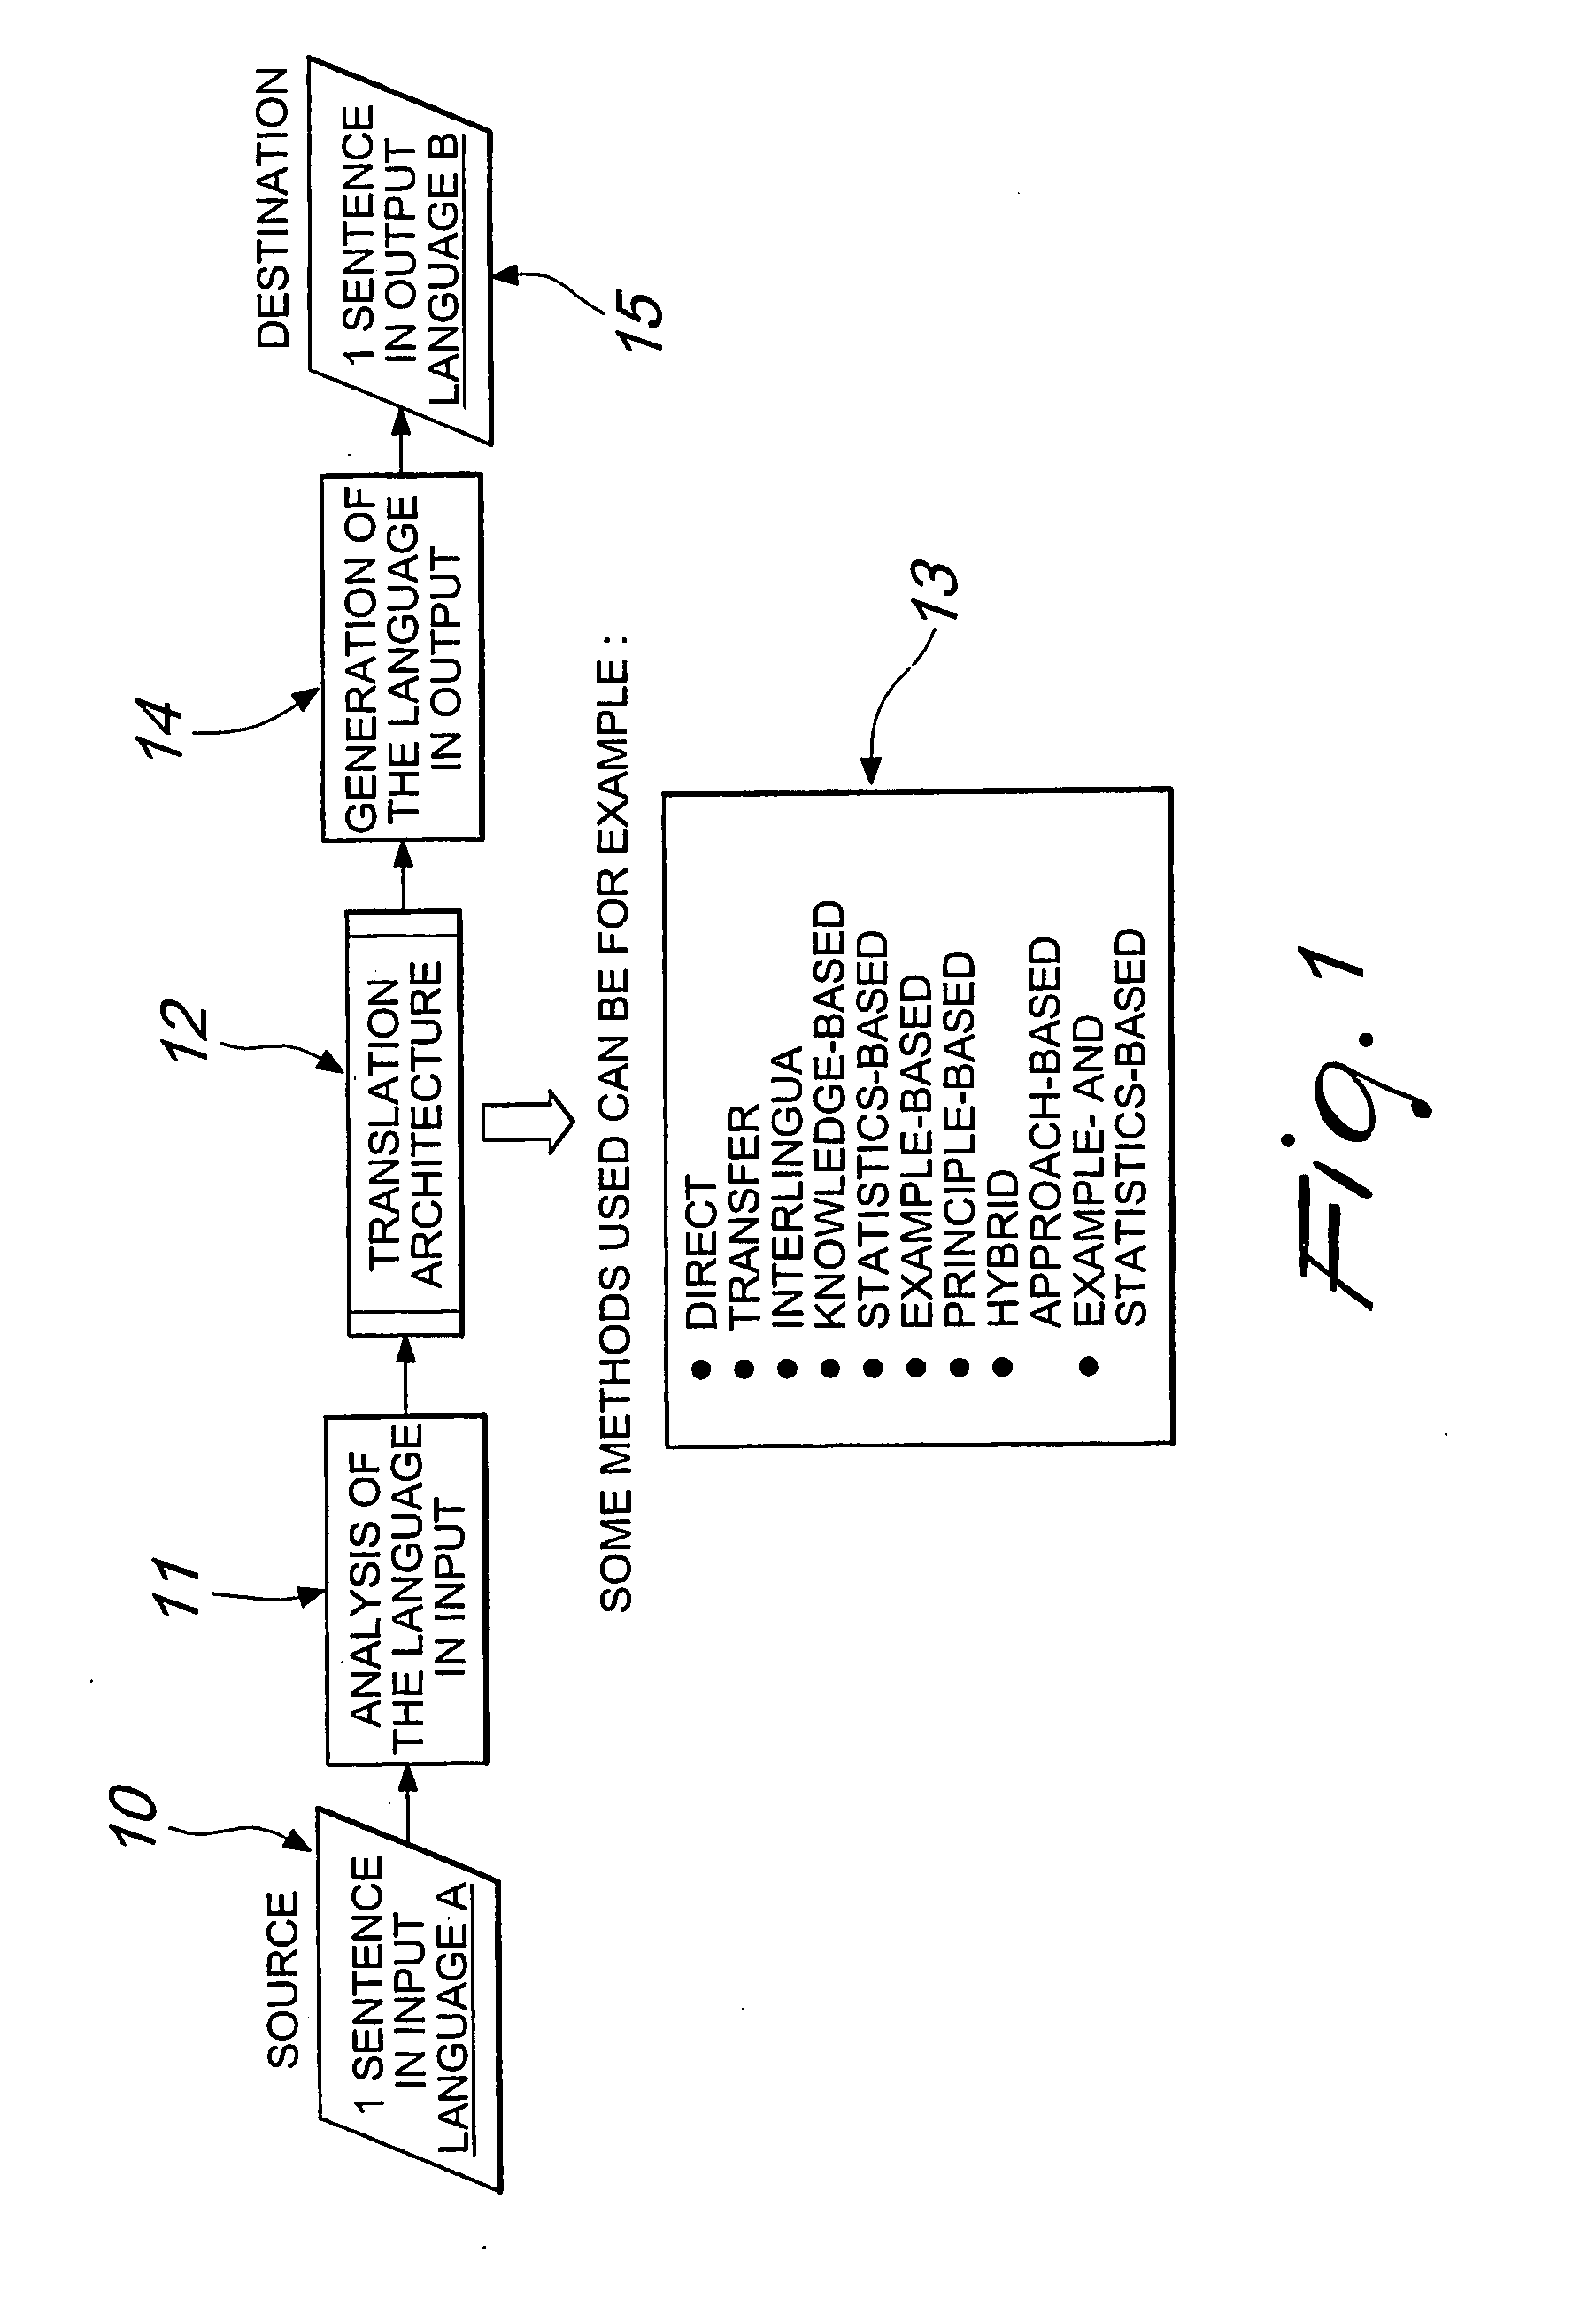 Method for Automatic Translation From a First Language to a Second Language and/or for Processing Functions in Integrated-Circuit Processing Units, and Apparatus for Performing the Method